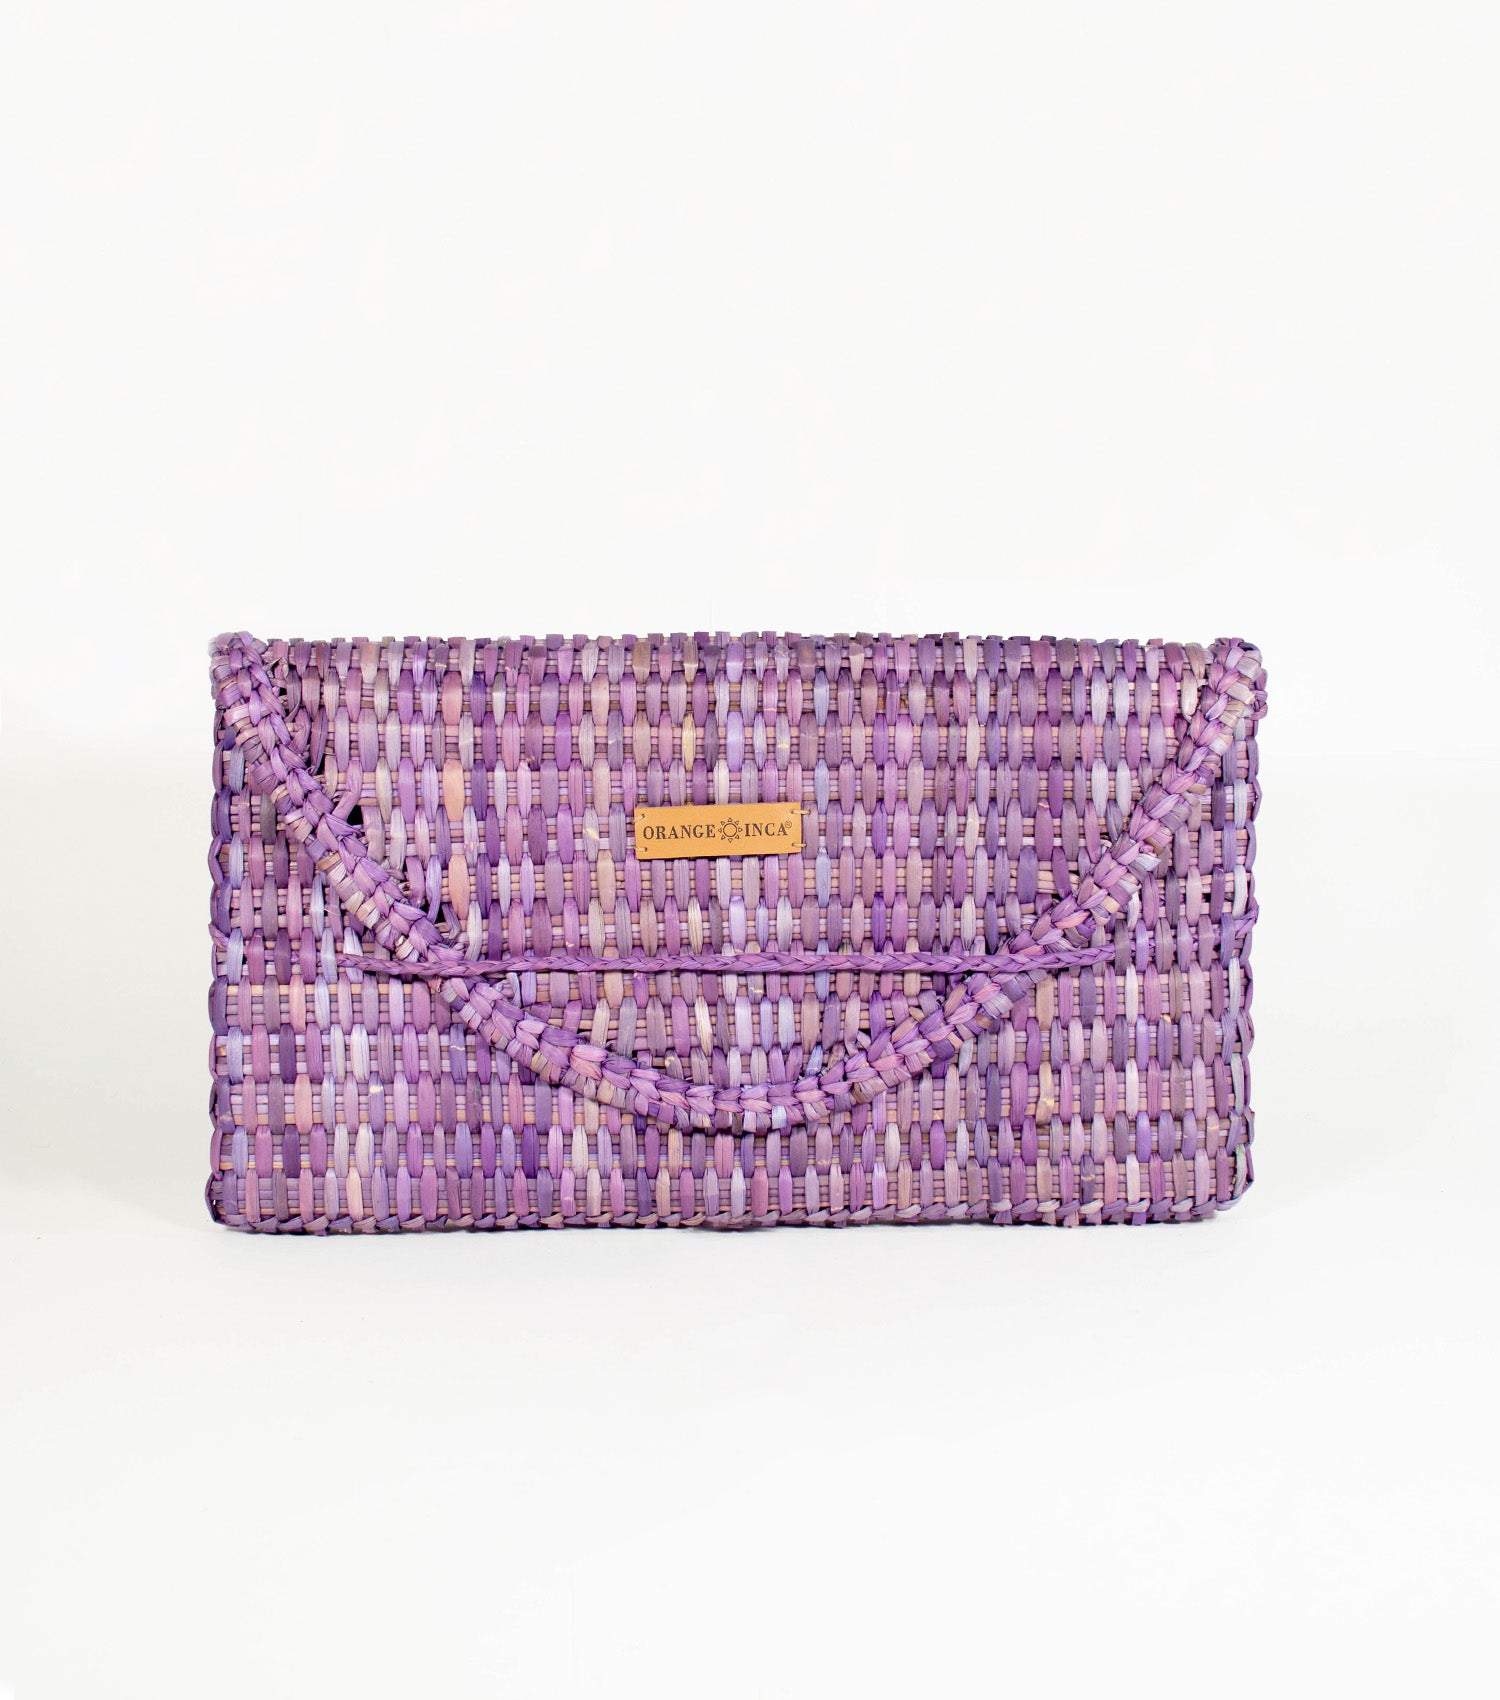 Lima Clutch front view - radiant Lilac  highlighted by its sleek design and the distinct Orange Inca emblem on vegetable leather.